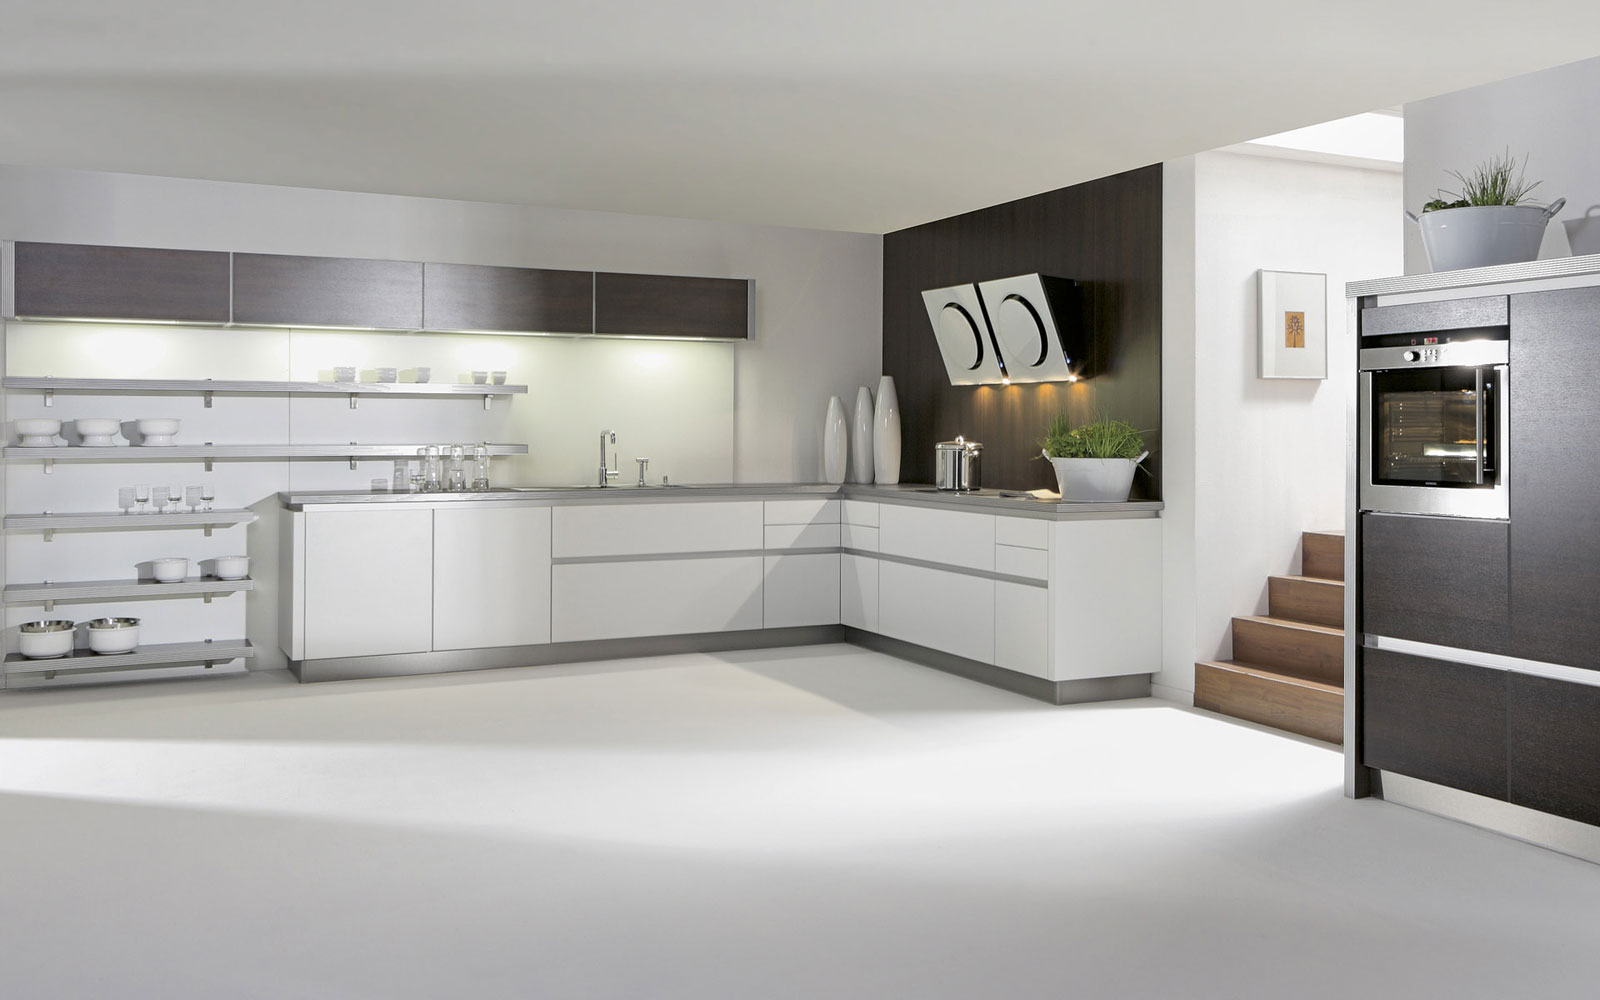 White Room Modern Excellent White Room Color In Modern Kitchen With Interior Design Styles Completed By Sectional Cupboards And Wall Cabinets And Furnished With Cabinet Lighting Interior Design Composing The Classic Or Modern Interior Design Styles